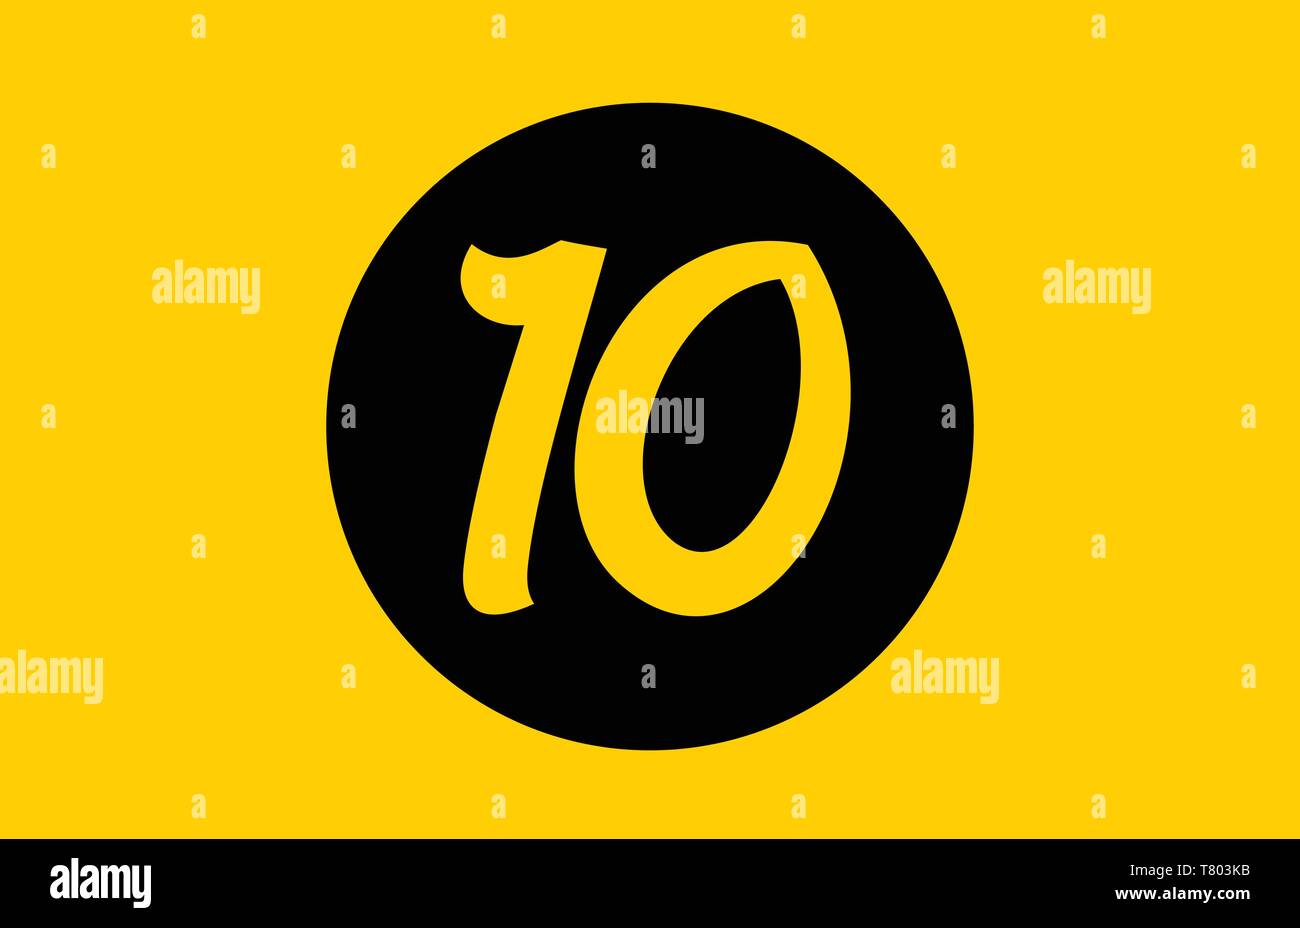 yellow number 10 icon design with black circle suitable for a